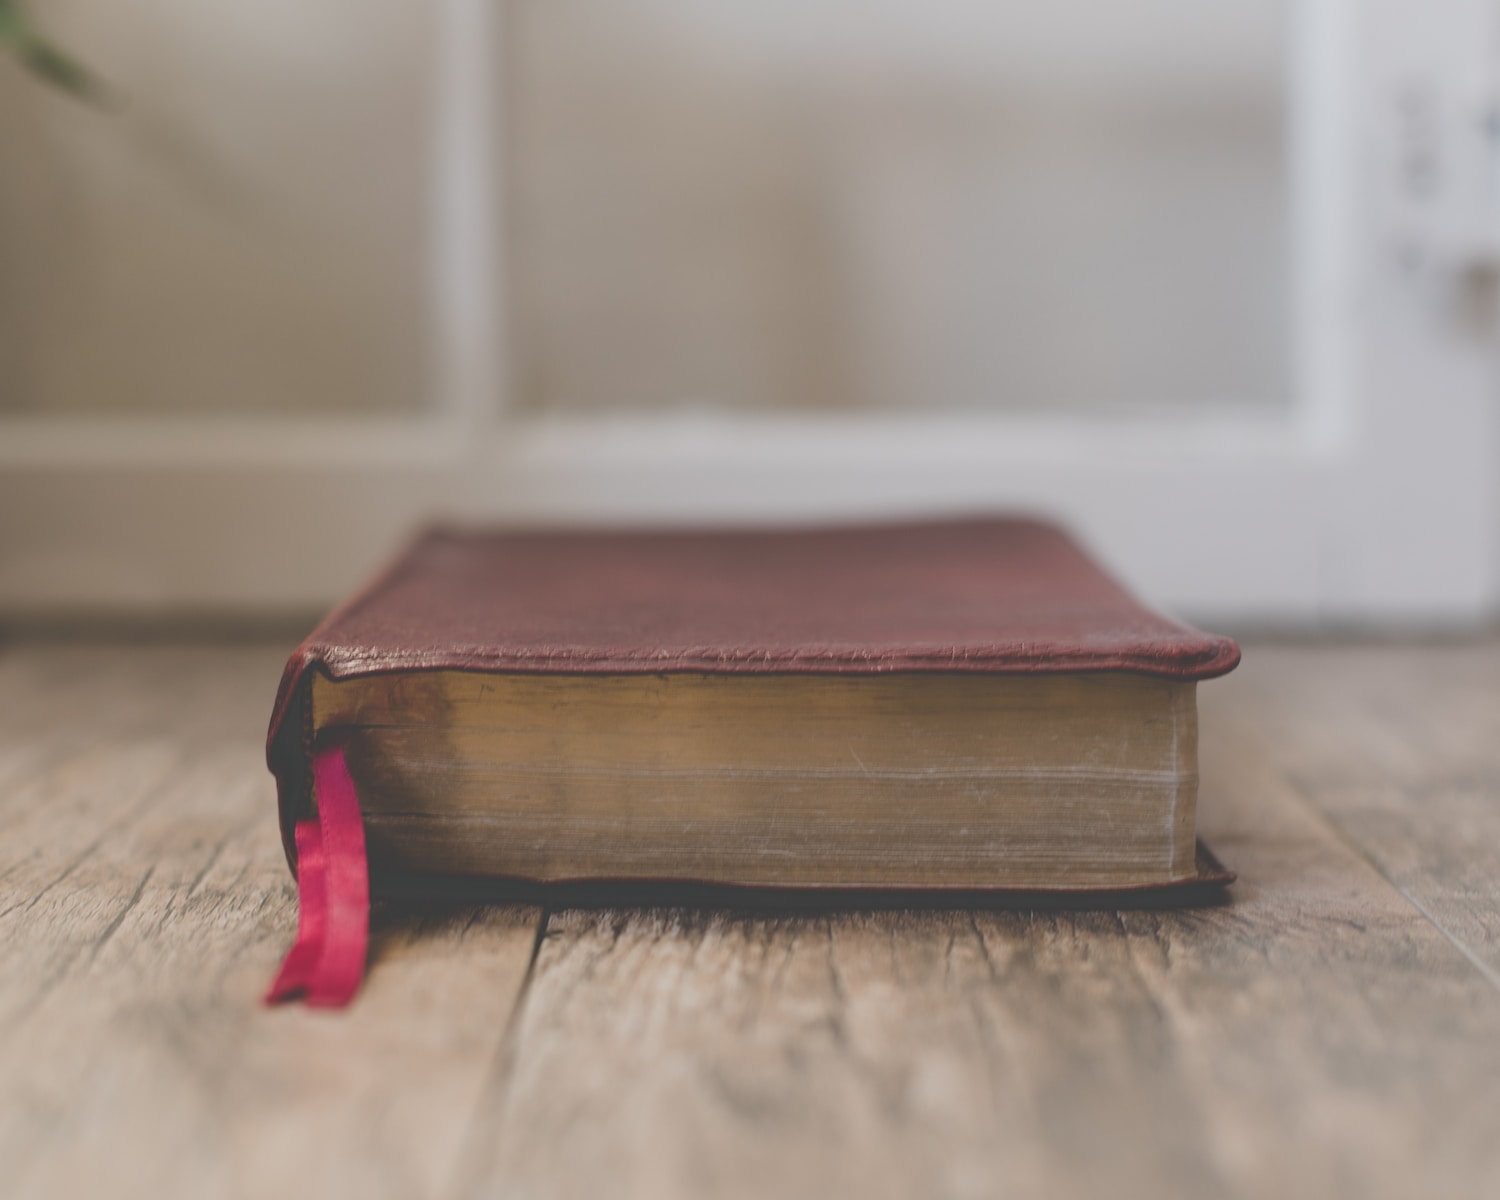 closed red book on brown wooden surface